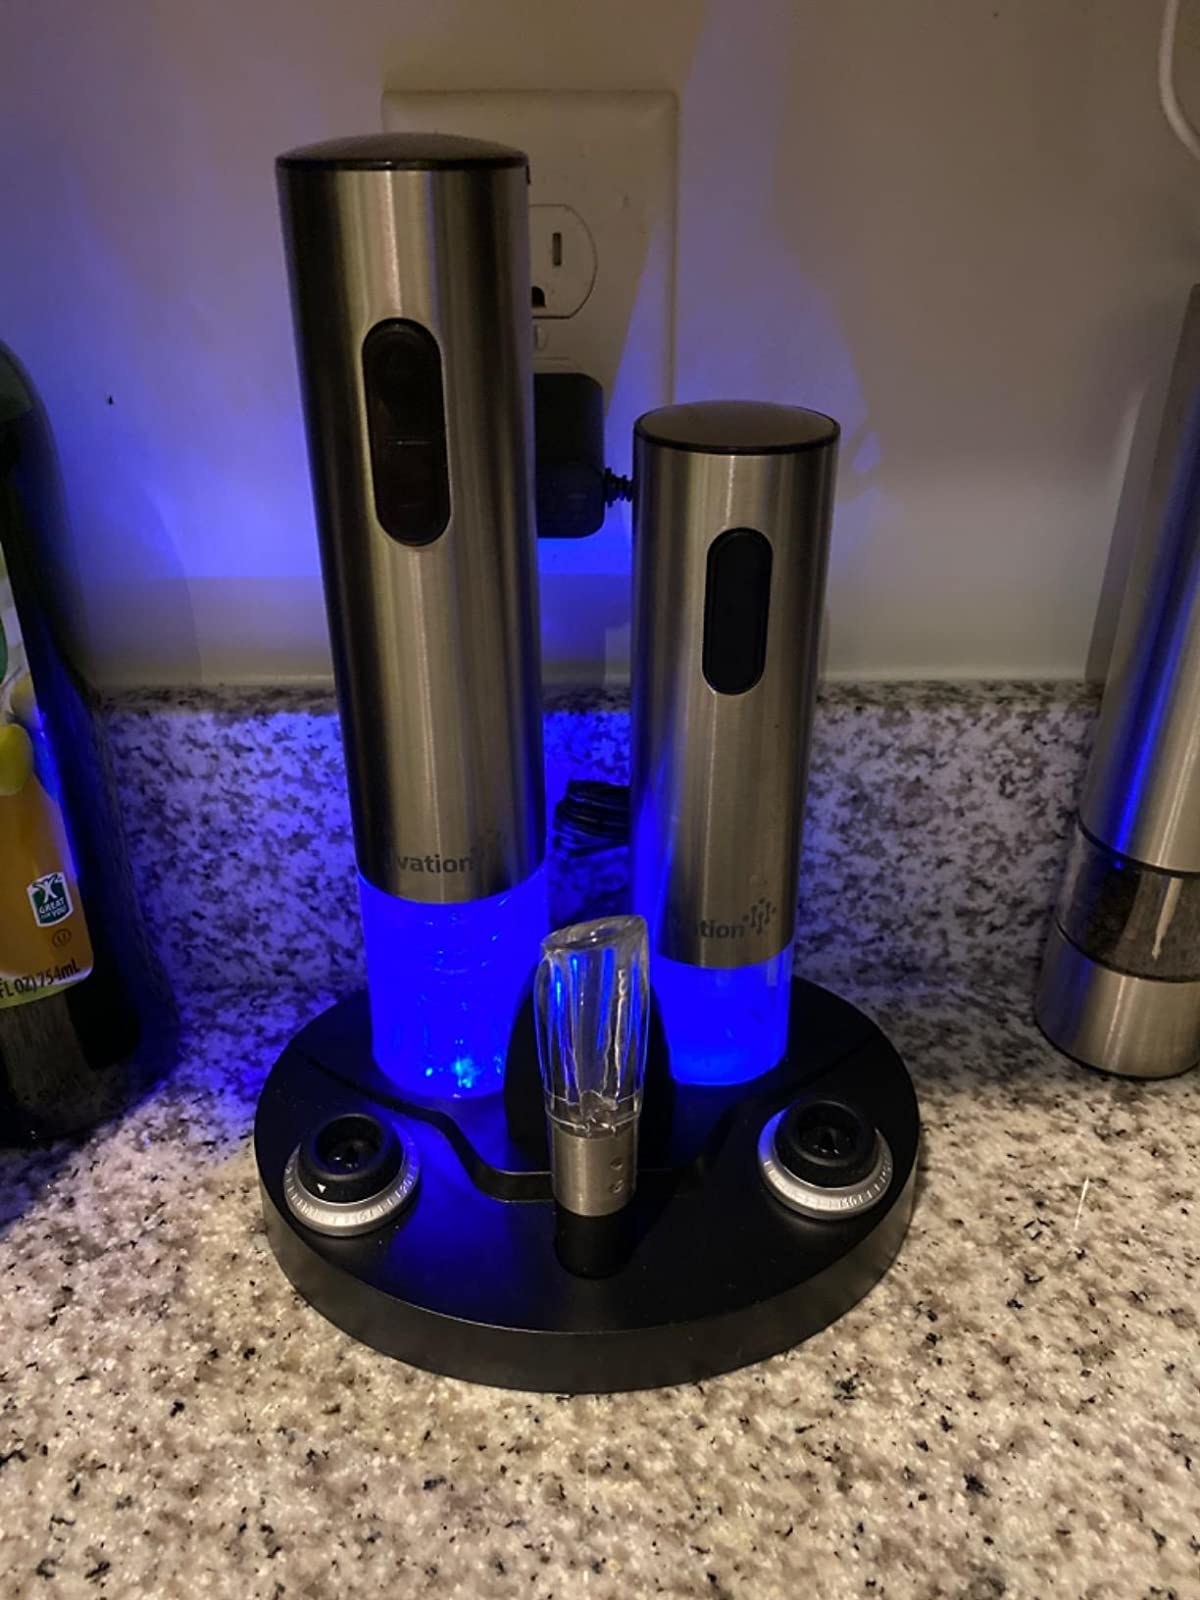 Reviewer image of the Ivation wine gift set on a kitchen counter, plugged in